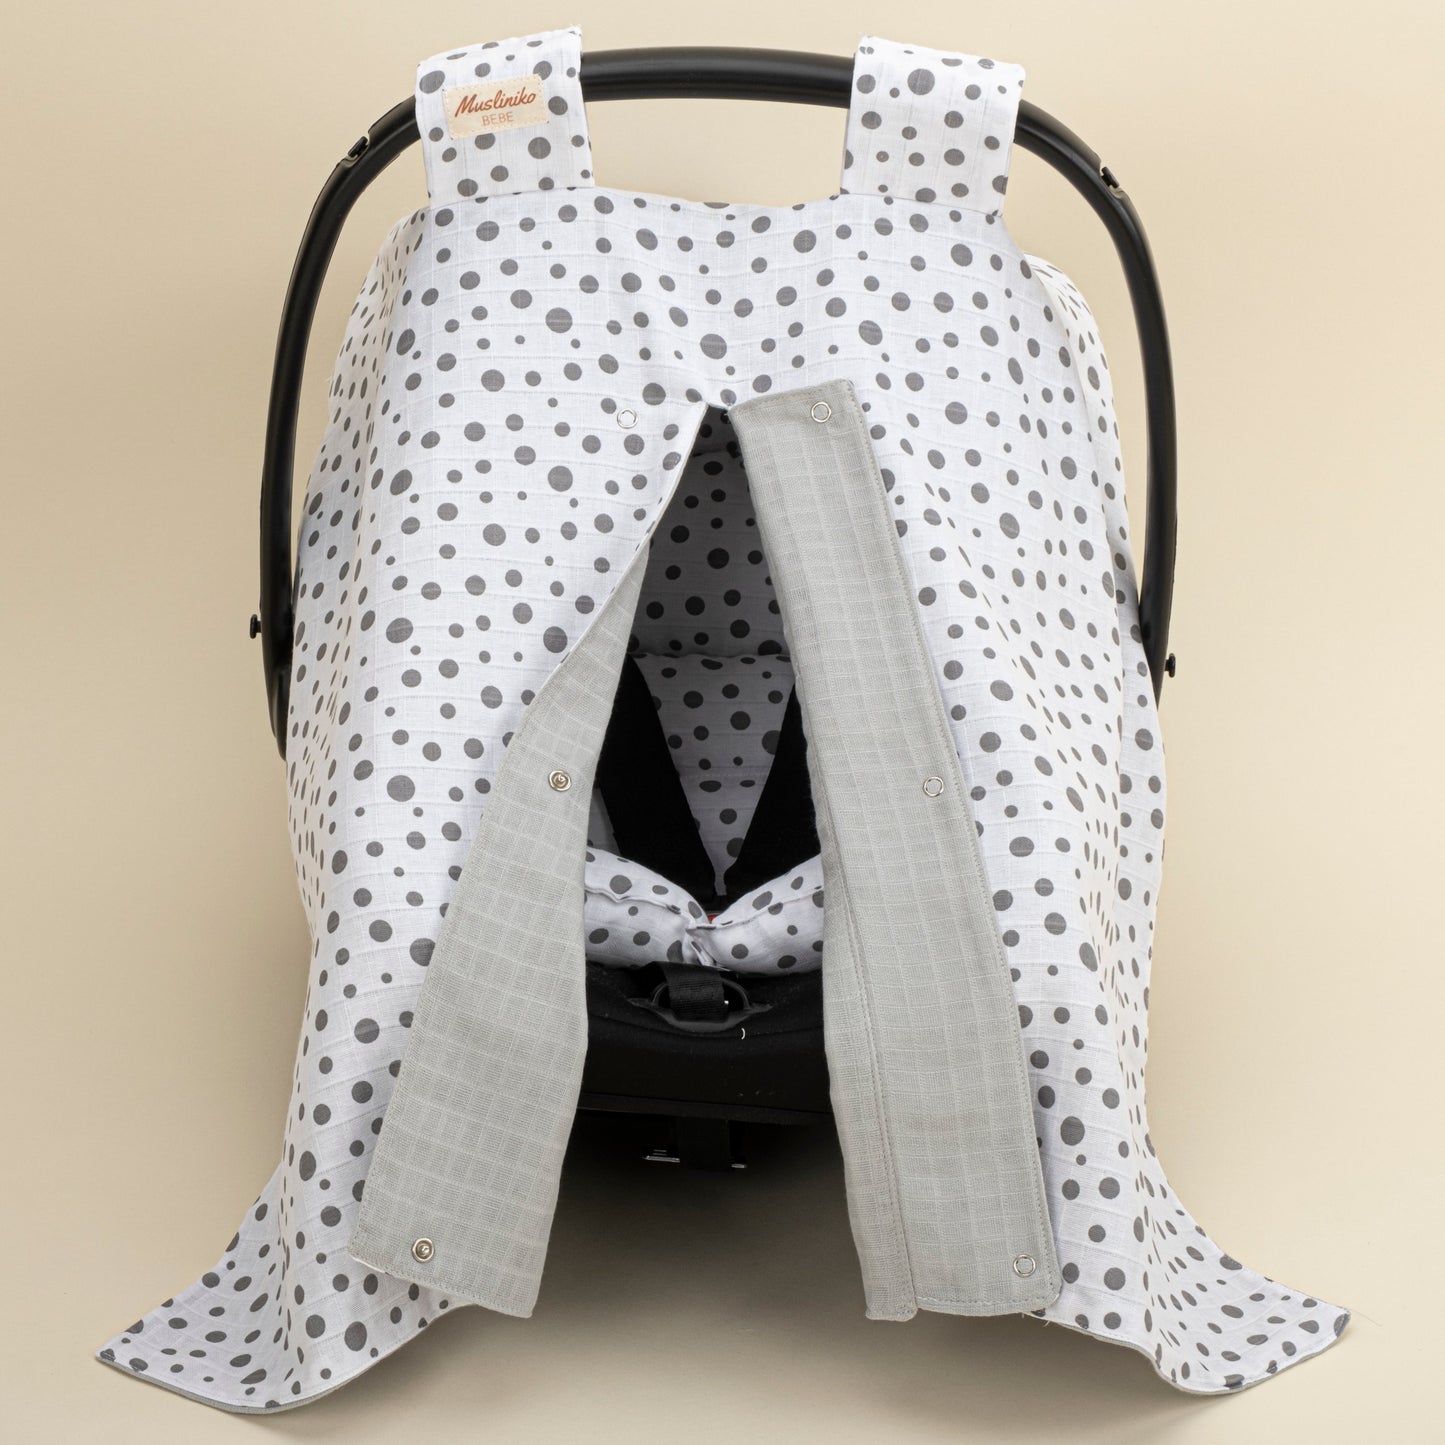 Stroller Cover Set - Double Side - Gray Muslin - Small Polka Dots